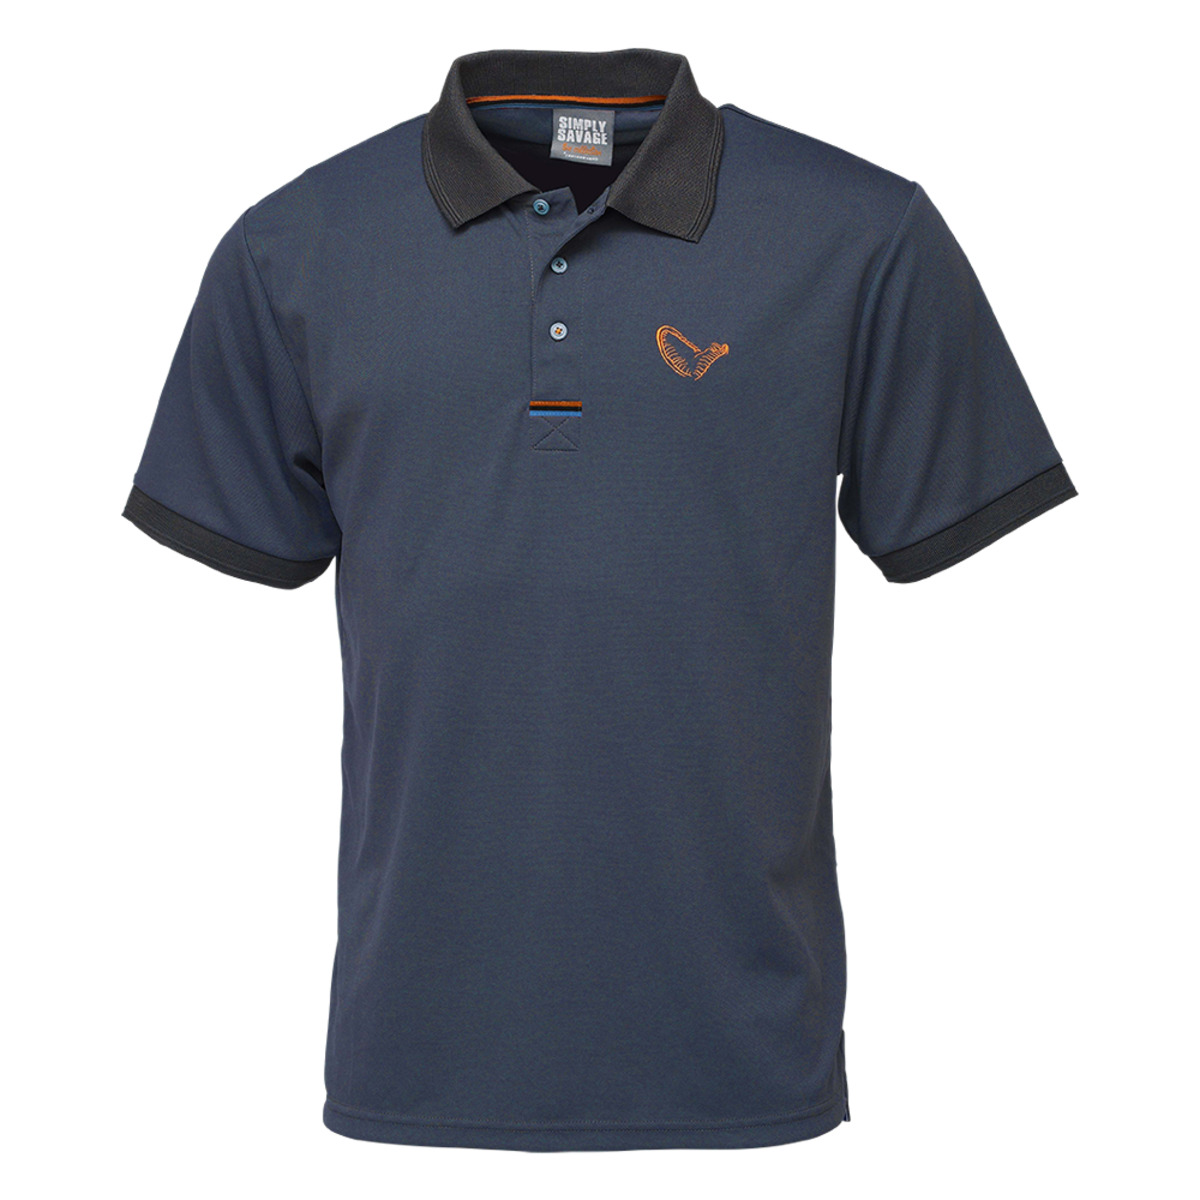 Savage Gear Simply Savage 3-stripes Polo Shirt - S OMBRE BLUE